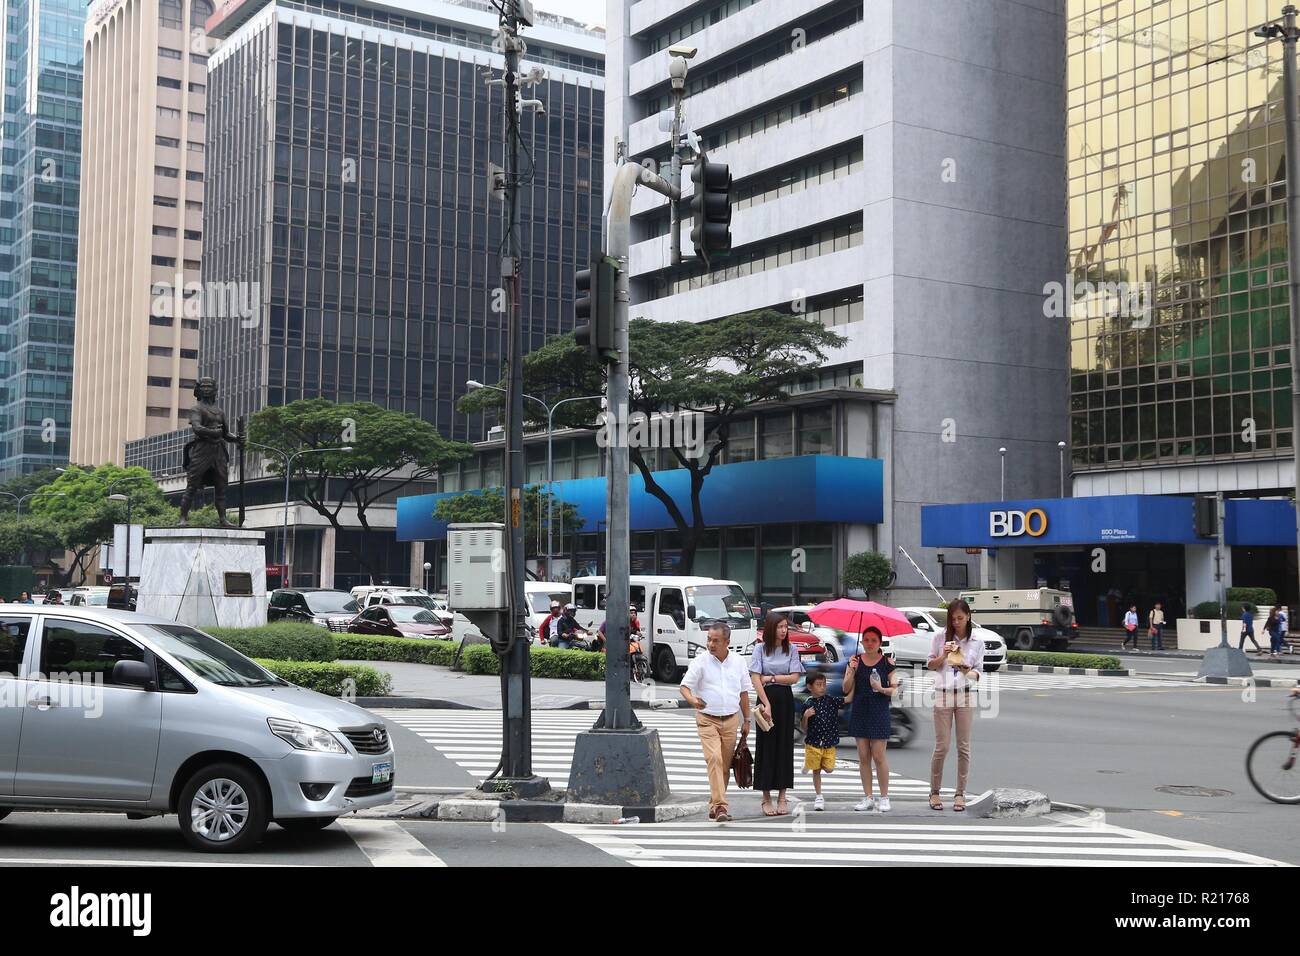 MANILA, PHILIPPINES - DECEMBER 7, 2017: People visit Makati City, Metro Manila, Philippines. Metro Manila is one of the biggest urban areas in the wor Stock Photo